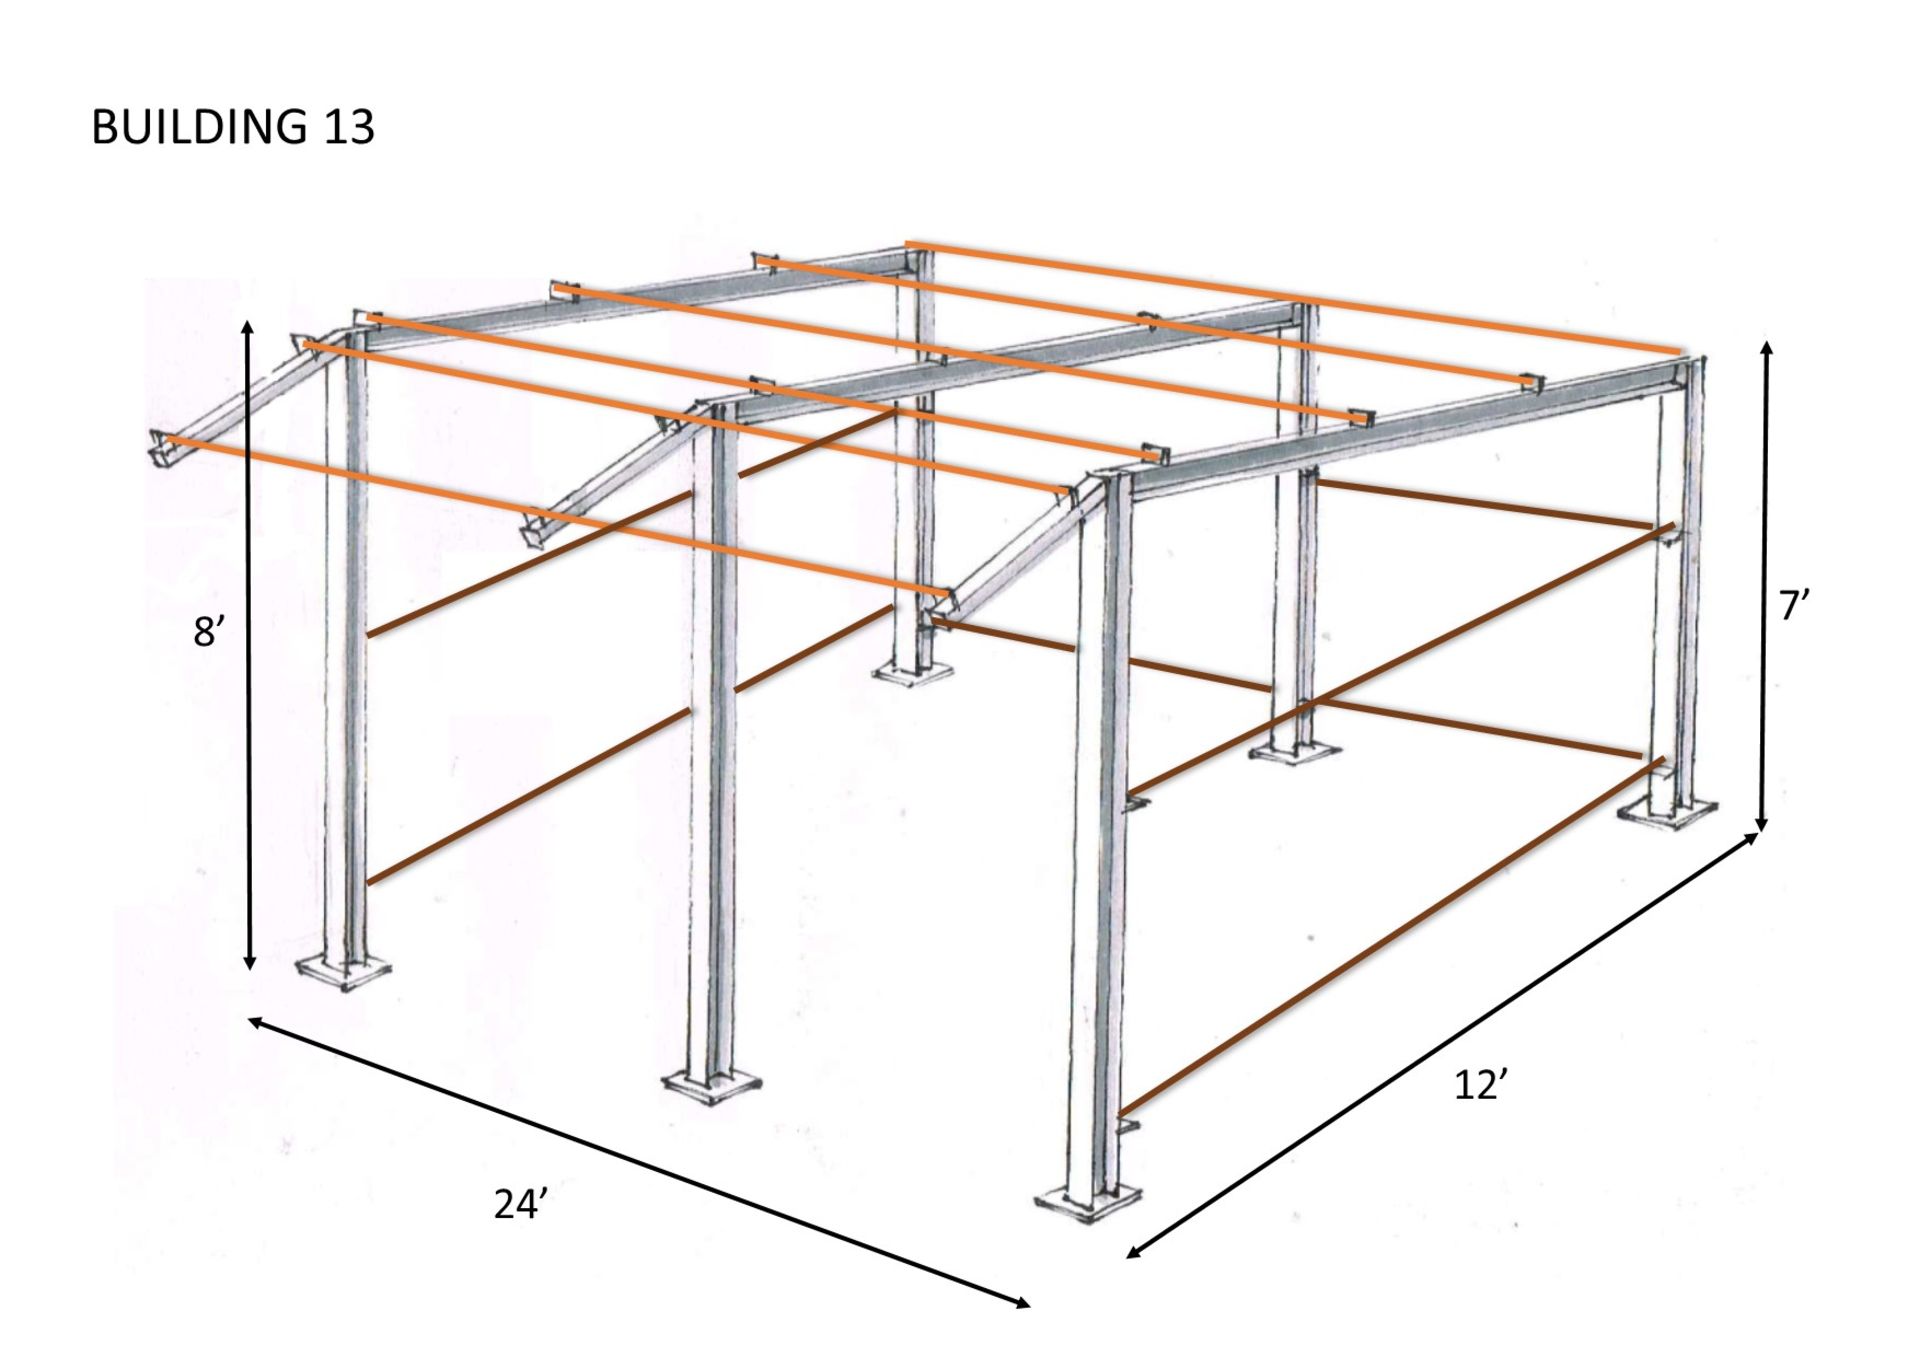 Steel framed stable/mono slope 24ftlong x 12ft wide x 8ft @front x7ft @ back x 3 ft canopy(e1224) - Image 7 of 10